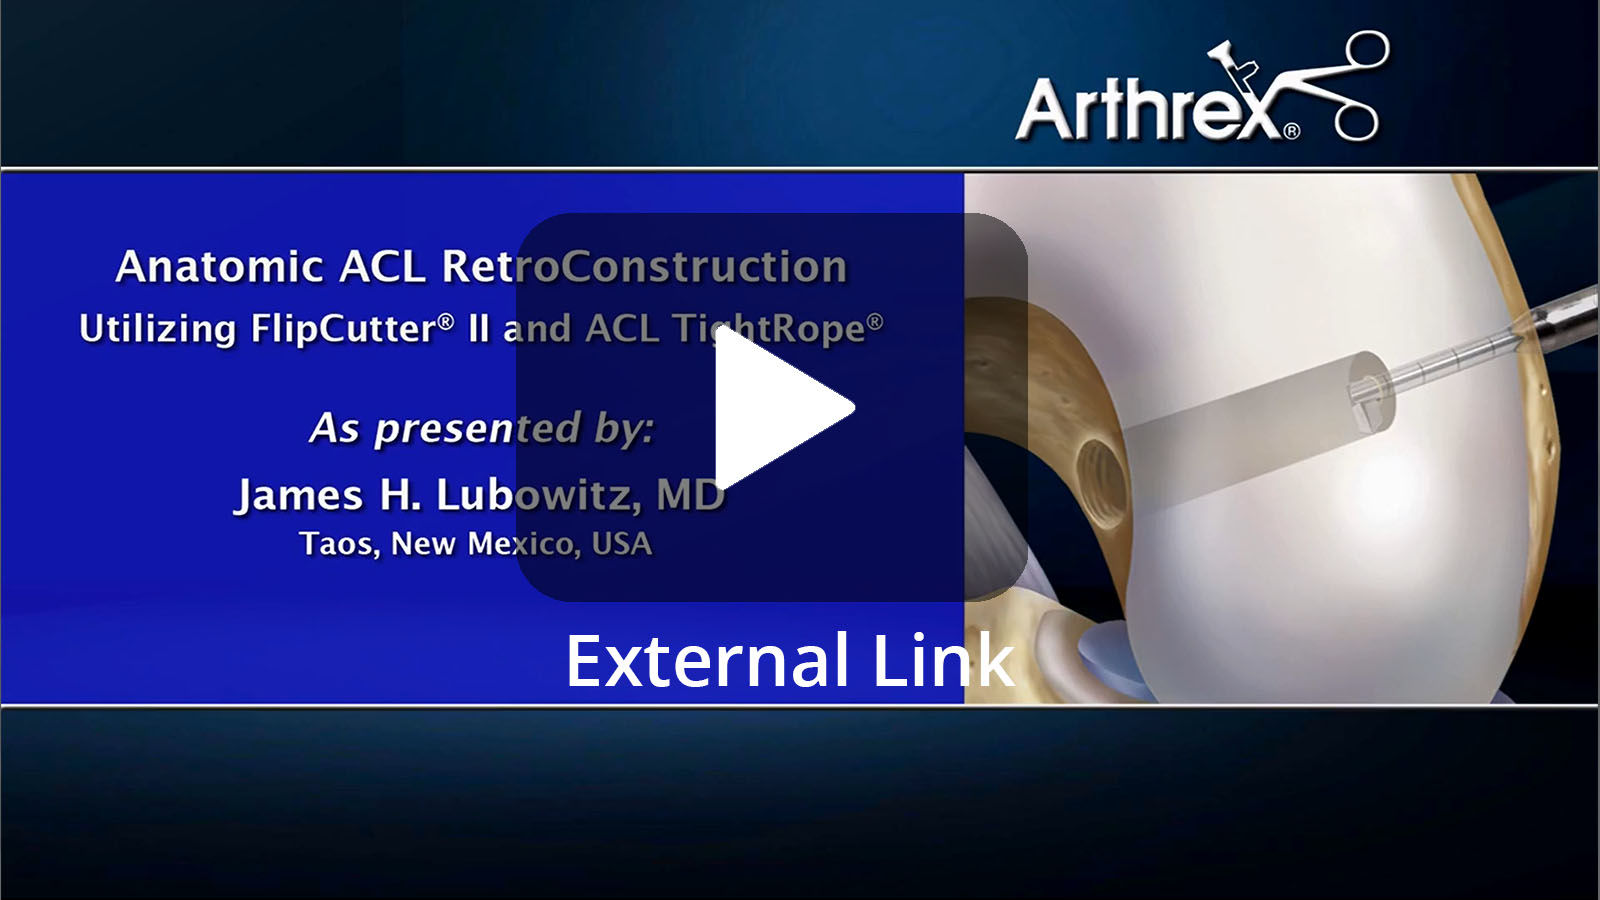 Anatomic ACL RetroConstruction™ Utilizing FlipCutter® II and ACL TightRope® sutures (External Link)